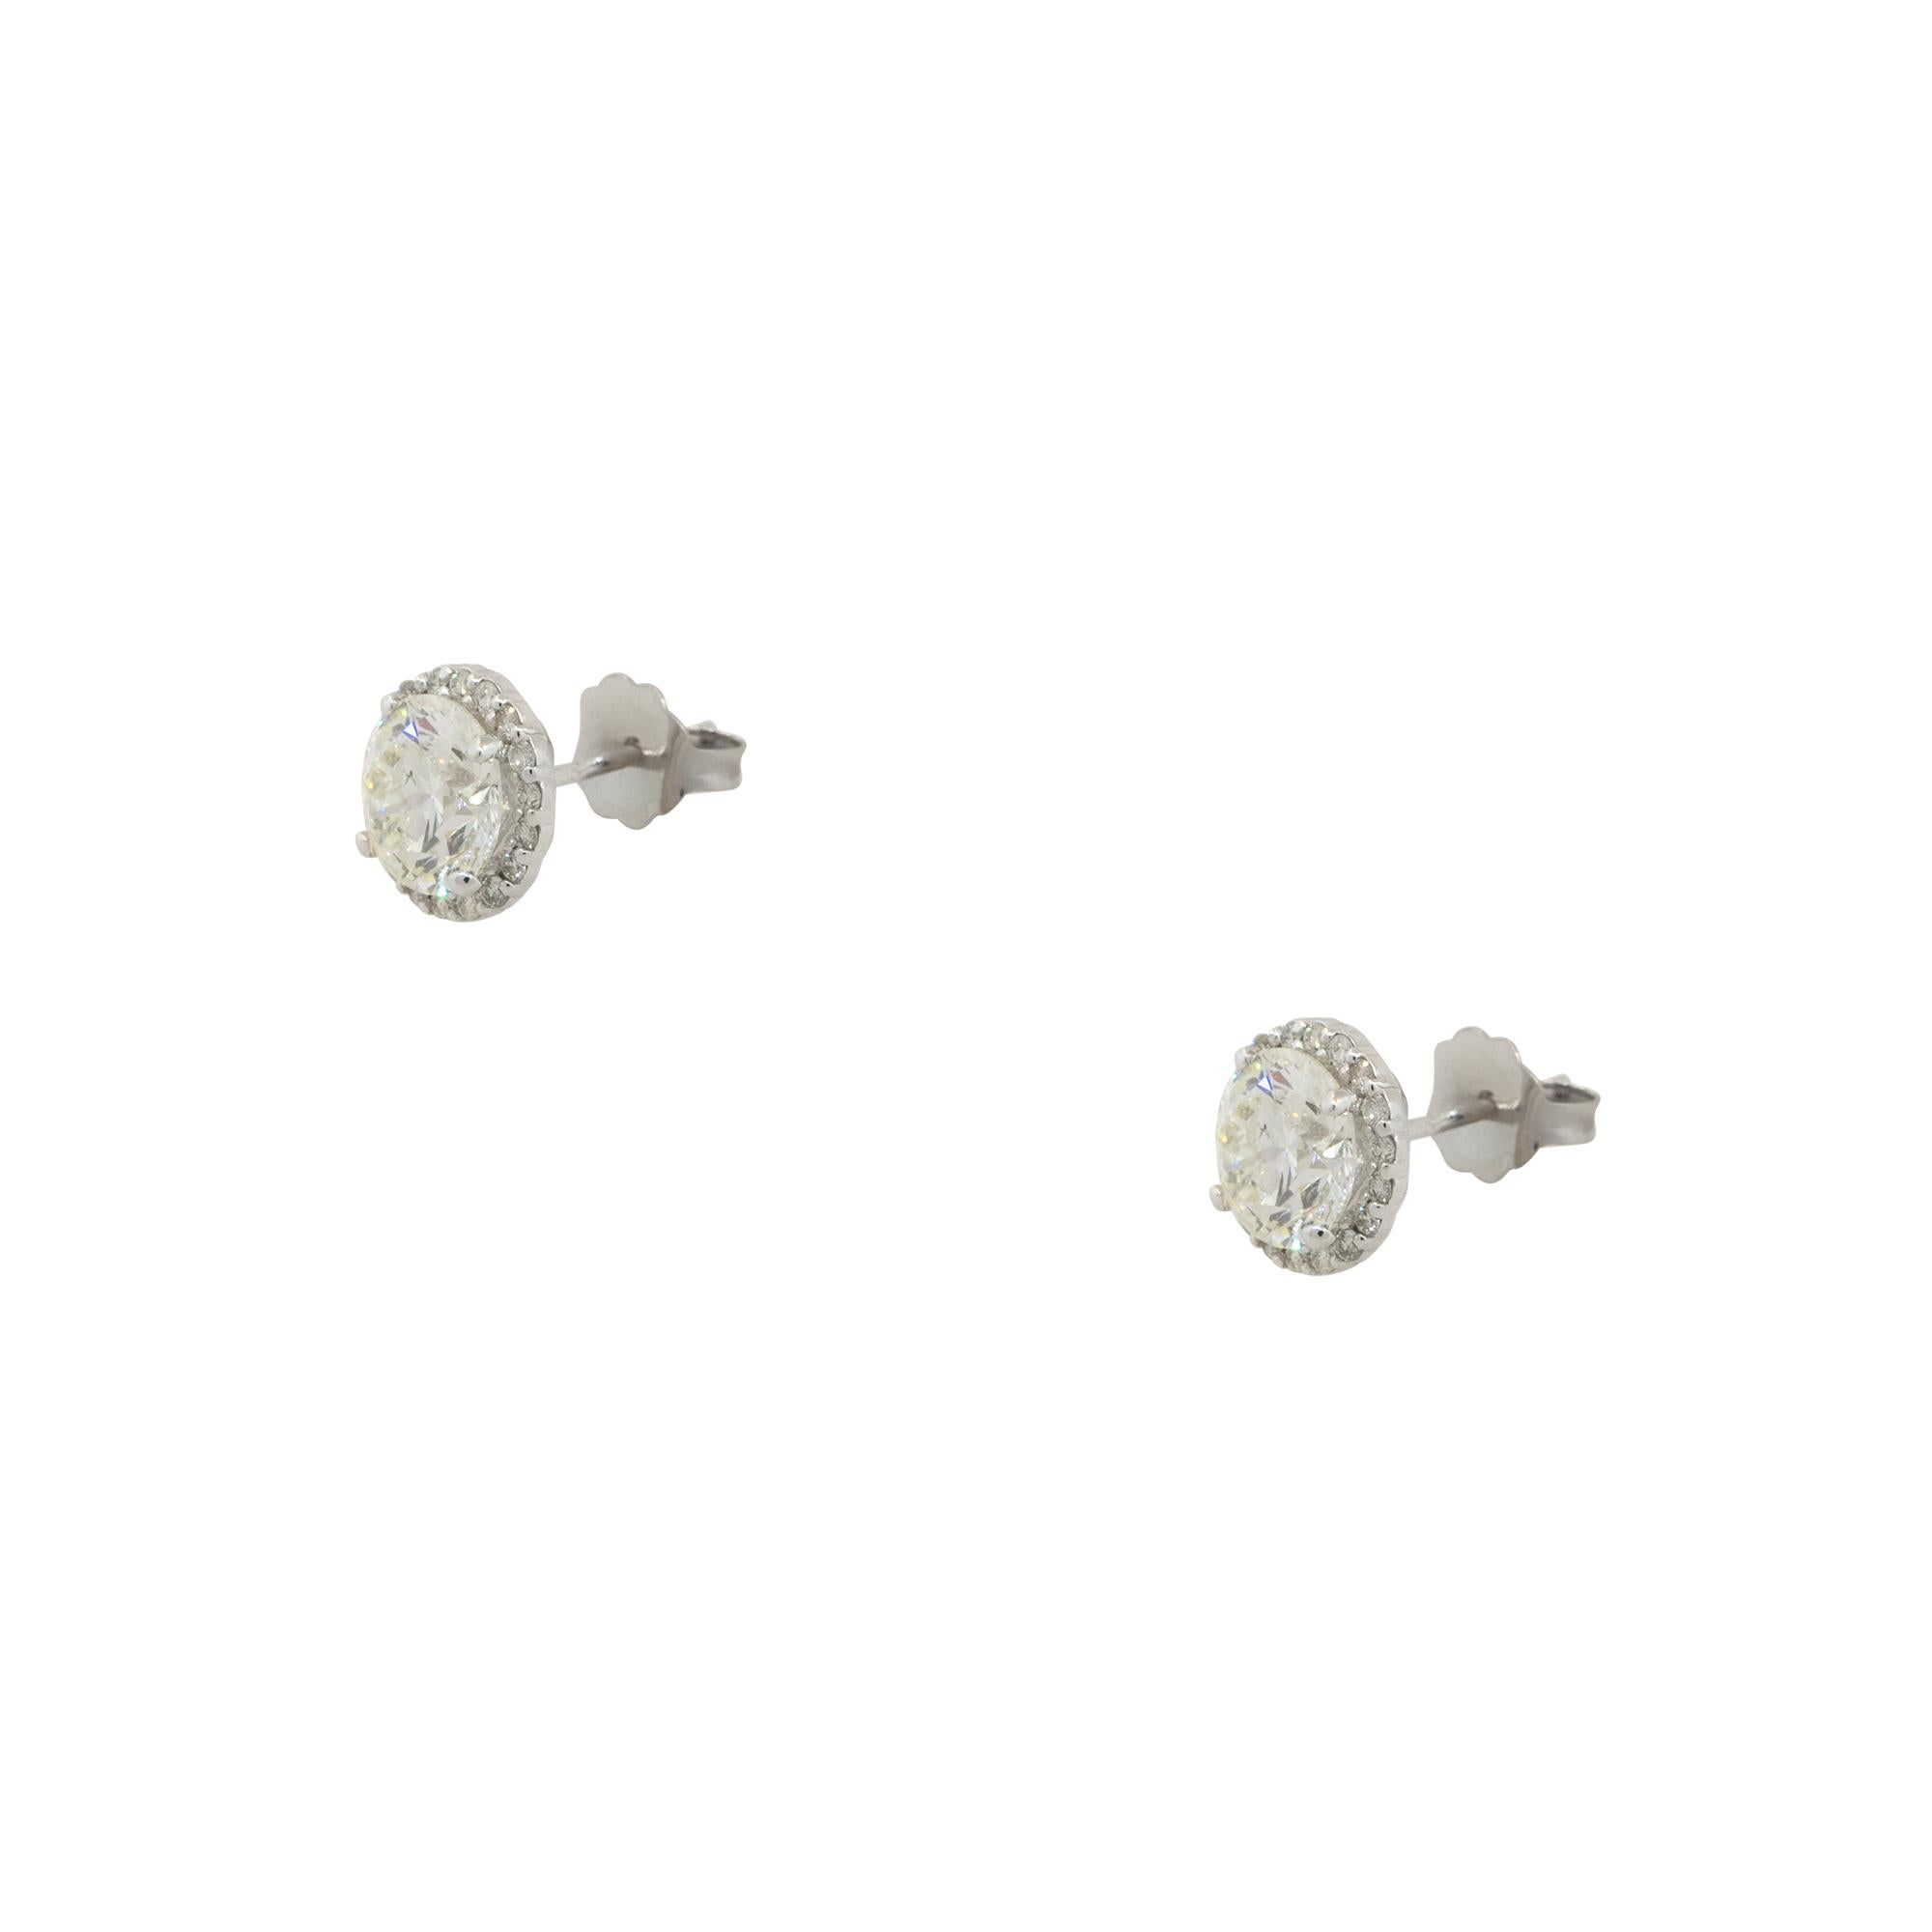 Material: 14k White Gold
Diamond Details: Main Diamonds are Approx. 2.44ctw. Halo Diamonds are approx. 0.25ctw. Diamonds are H/I in color and SI in clarity
Earring Backs: Friction Backs
Weight: 1.2dwt
Additional Details: This item comes with a